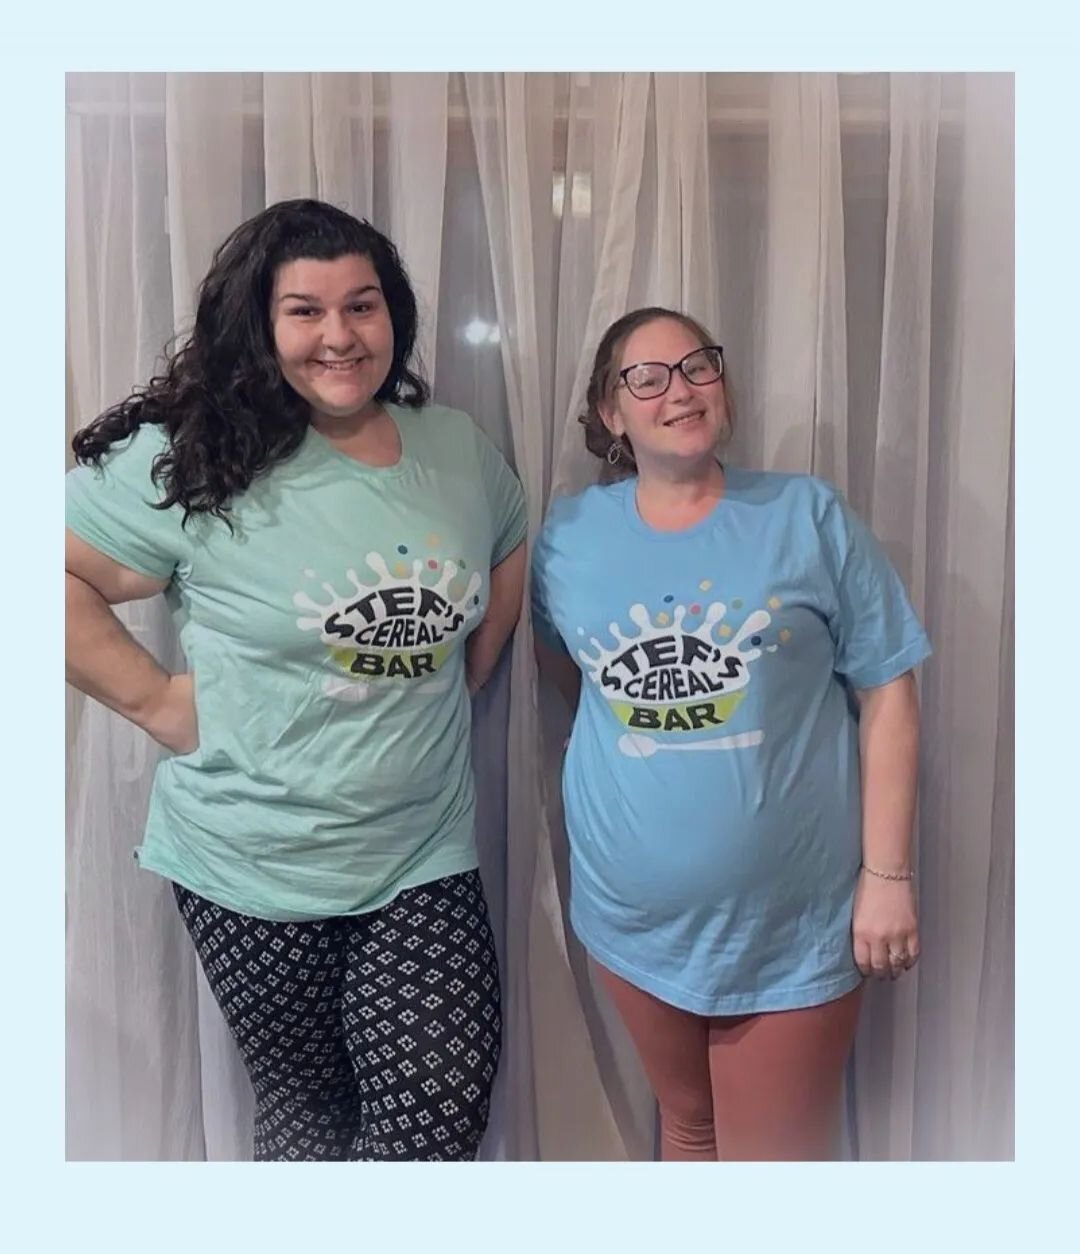 We got Tshirts! They are super comfy!! Big shout out to our friends @topbananausa for hooking it up! Be sure to see us at @campjammusicfest to get yours! Also available on our website!! 💙🥛👕🥄💚